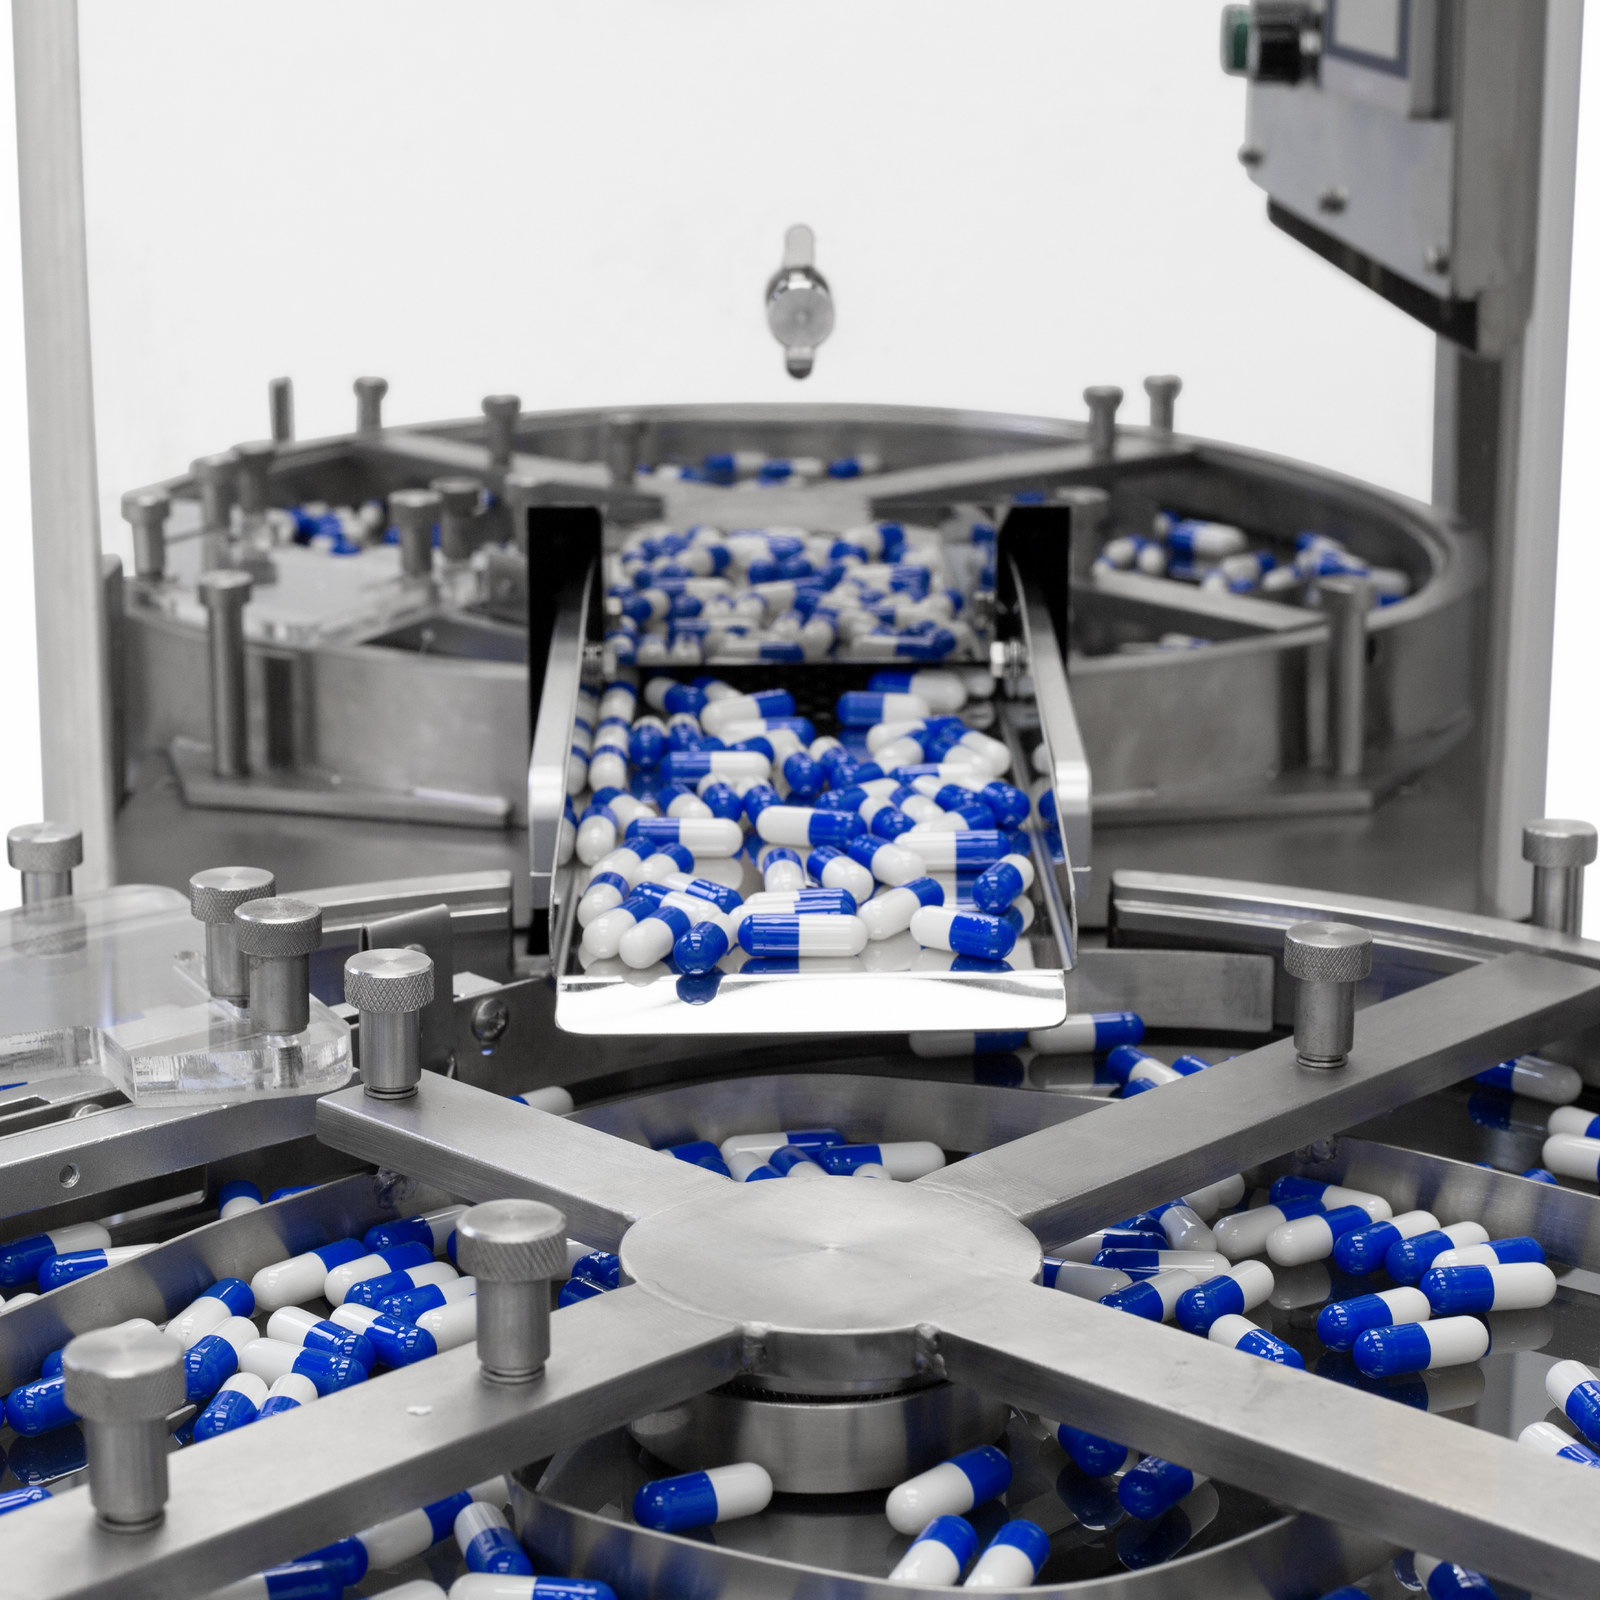 How pills exit from a large stainless steel hopper of the JORES TECHNOLOGIES® pill counter and fall into a circular segmented tray.  